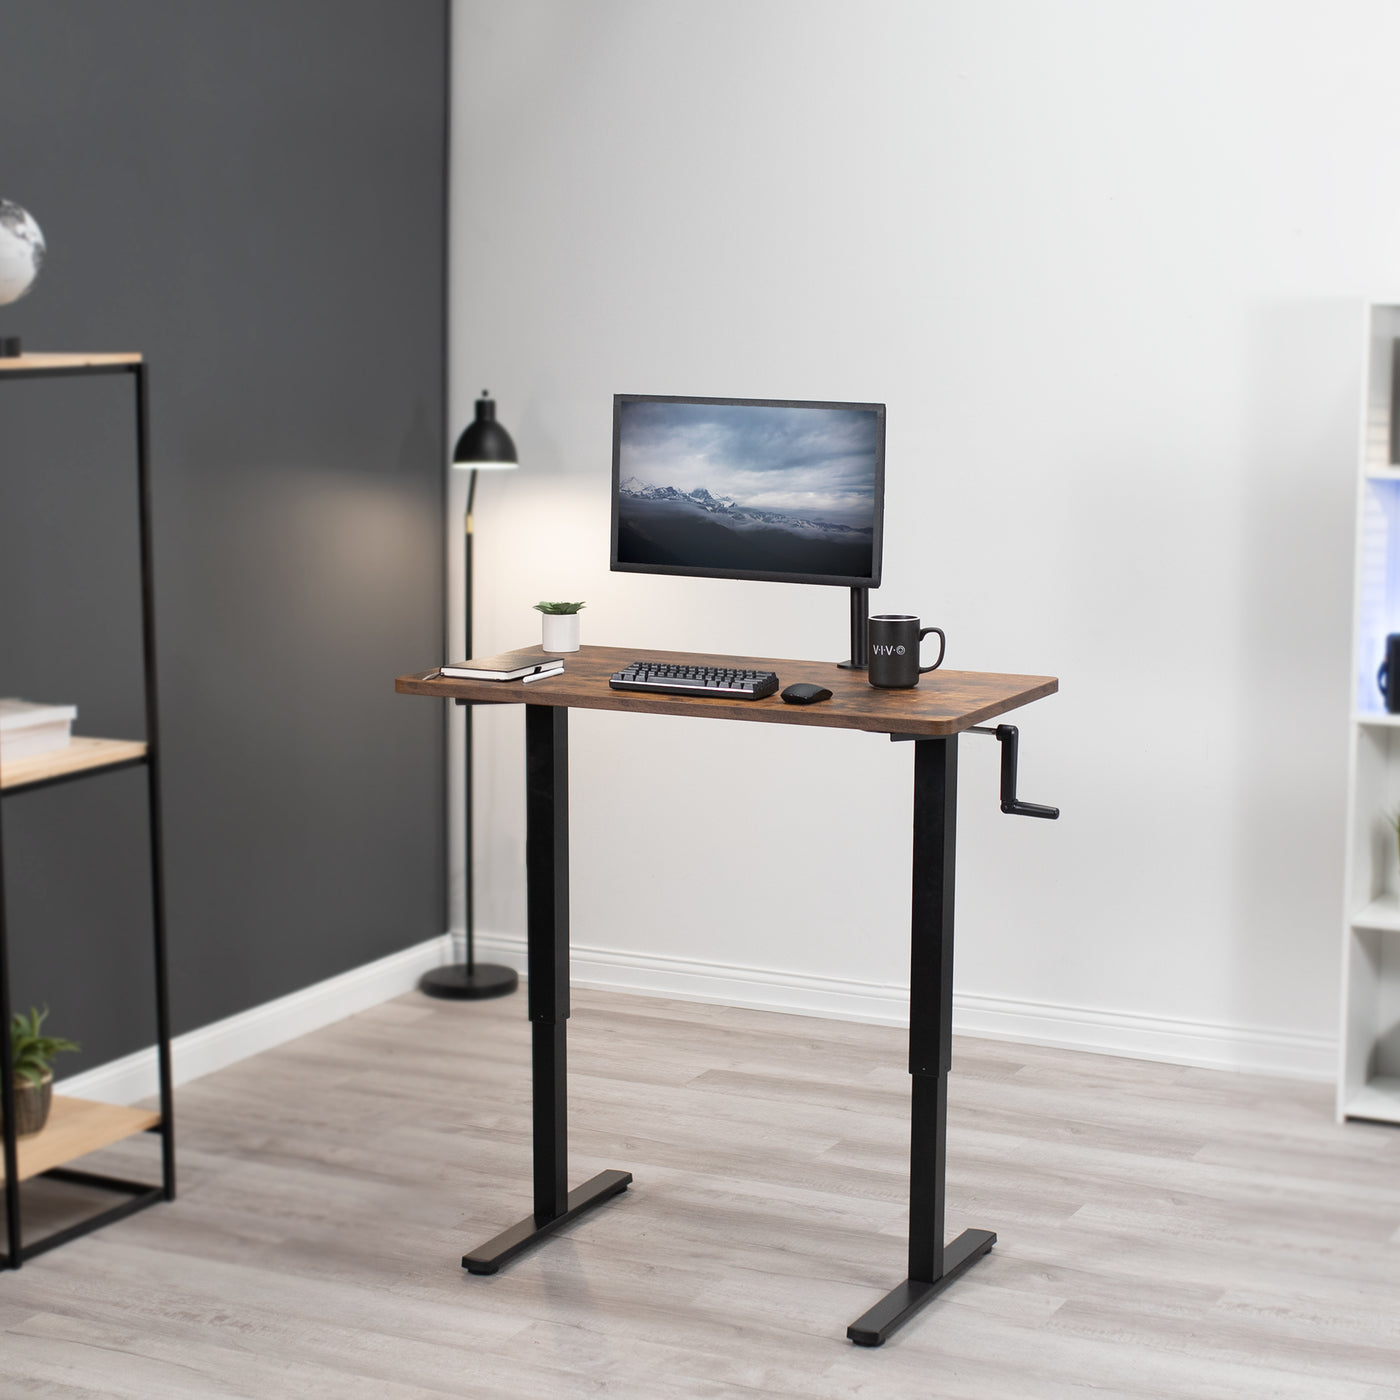 Manual hand crank rustic height adjustable desk for active sit to stand workstation.